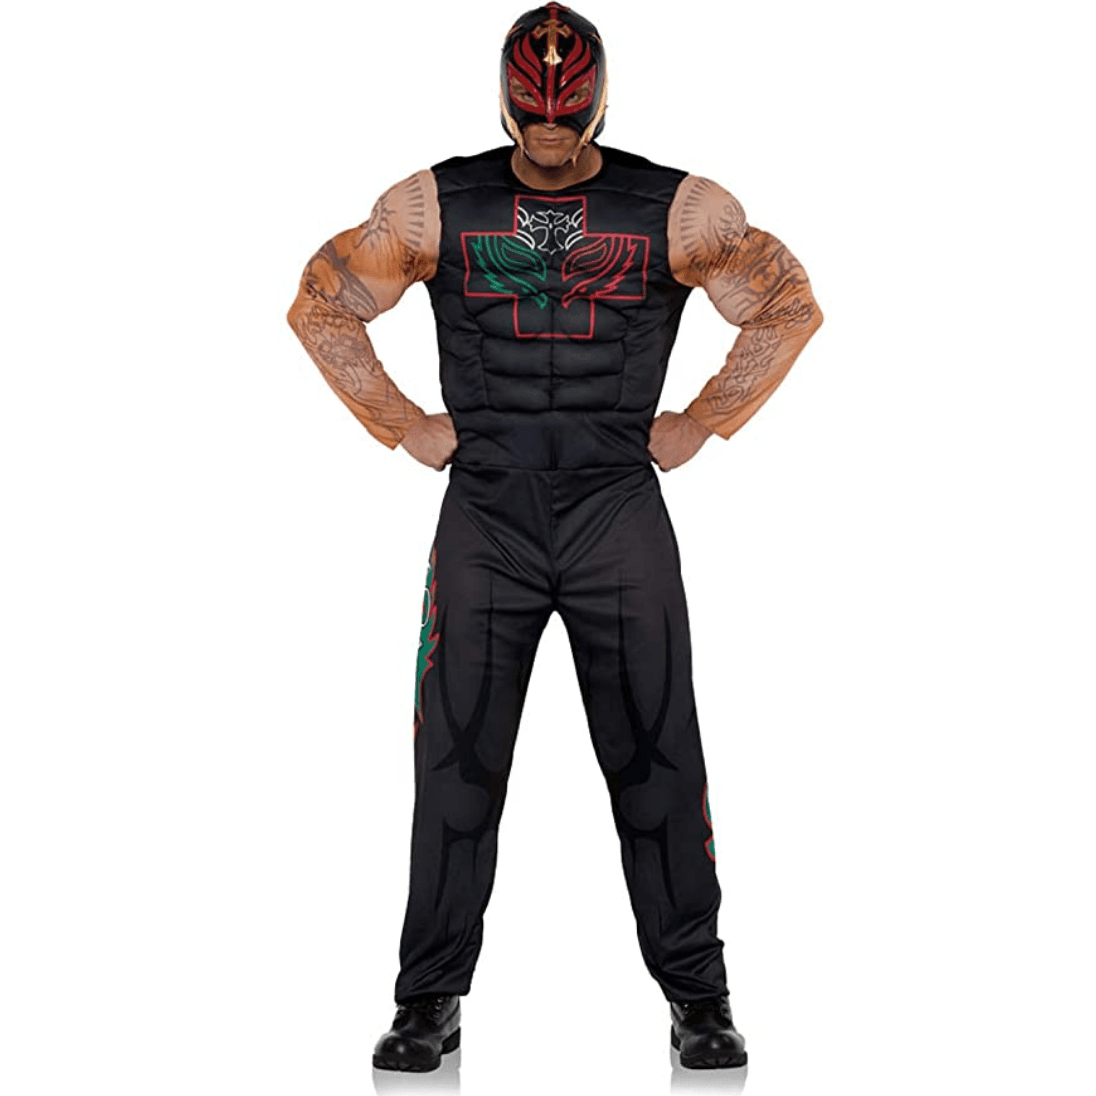 Rey Mysterio Legends of Lucha Libre Adult Costume